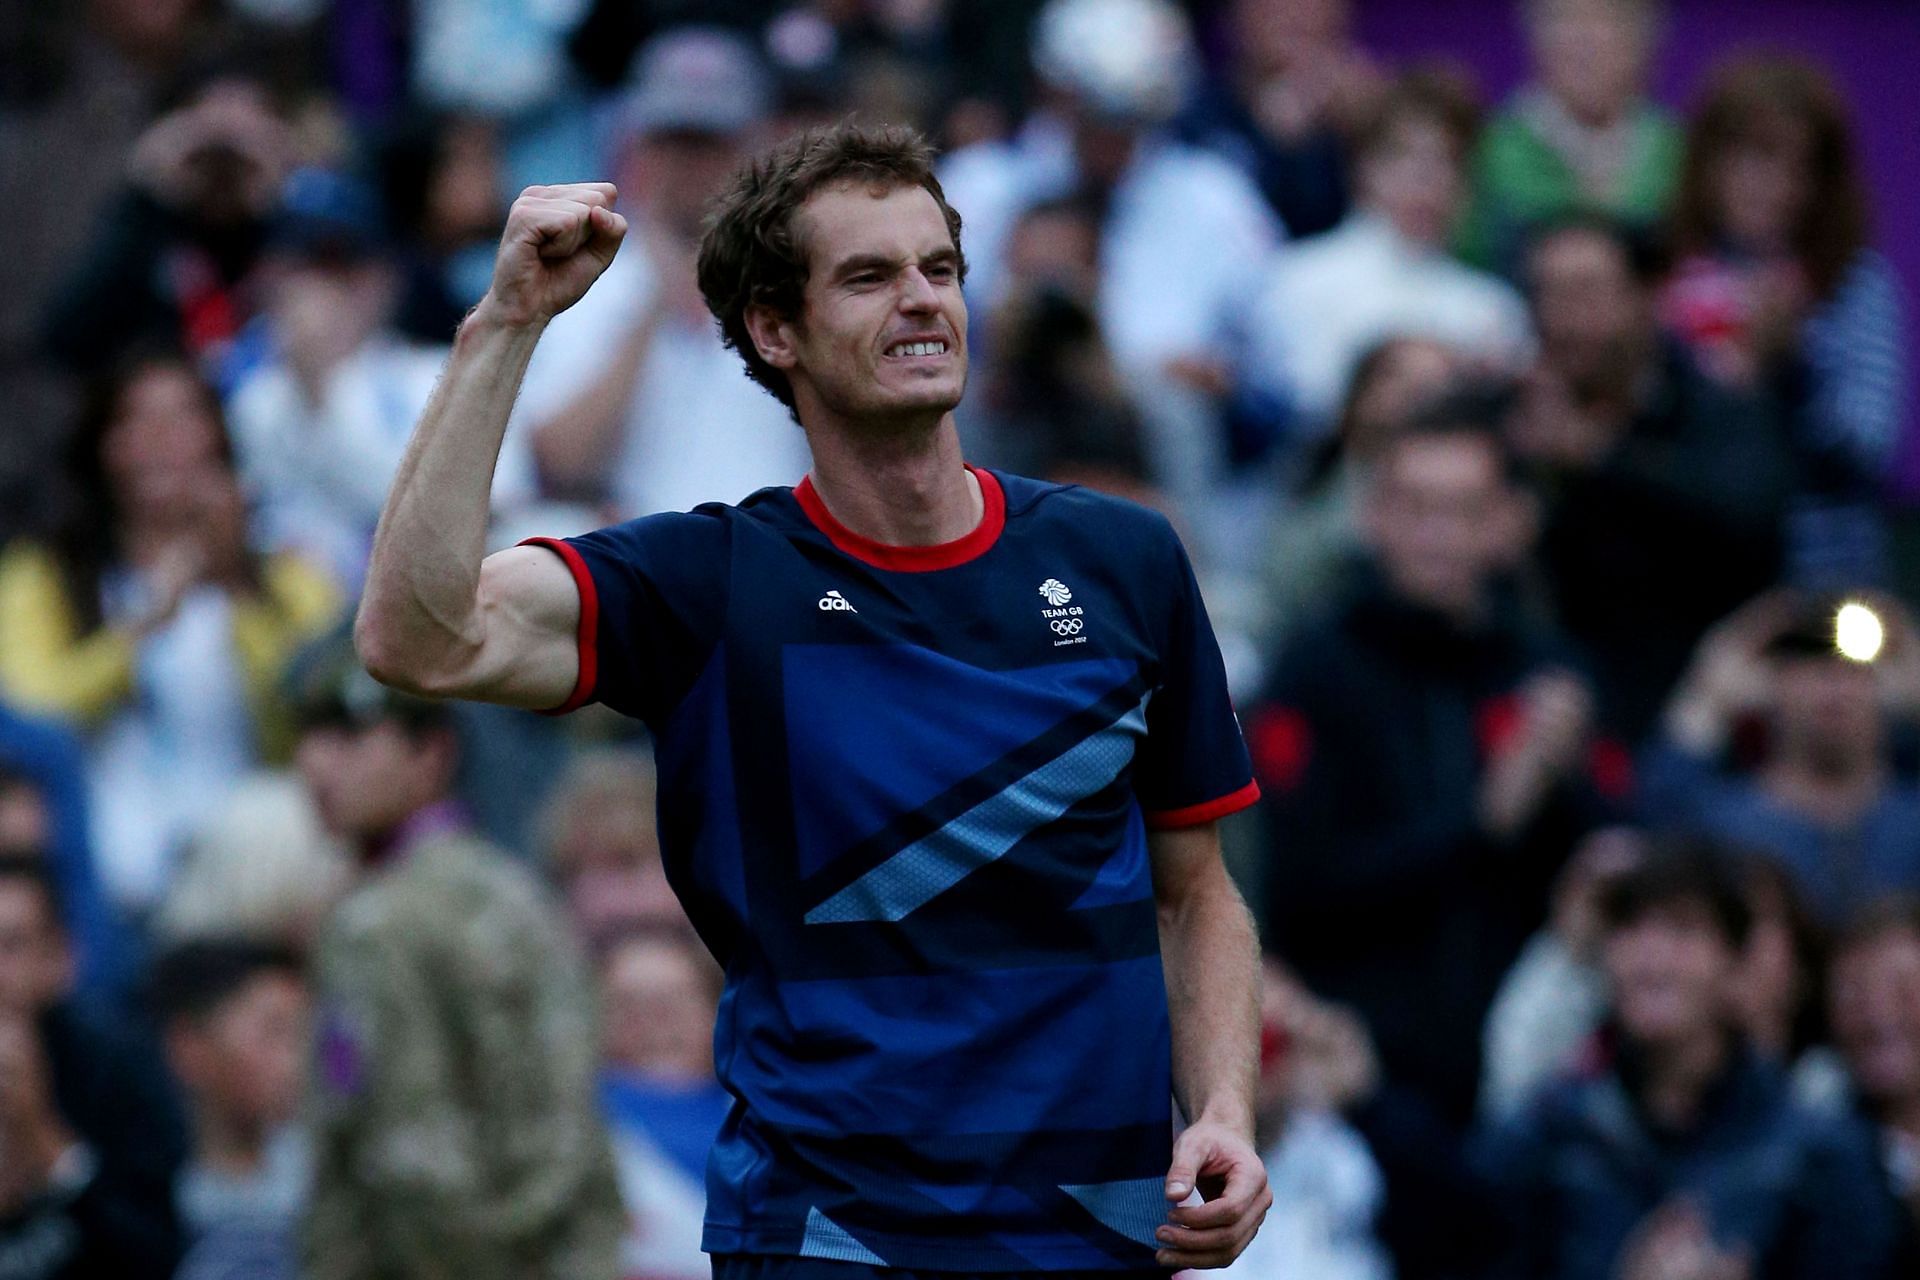 Murray pictured at the 2012 London Olympics